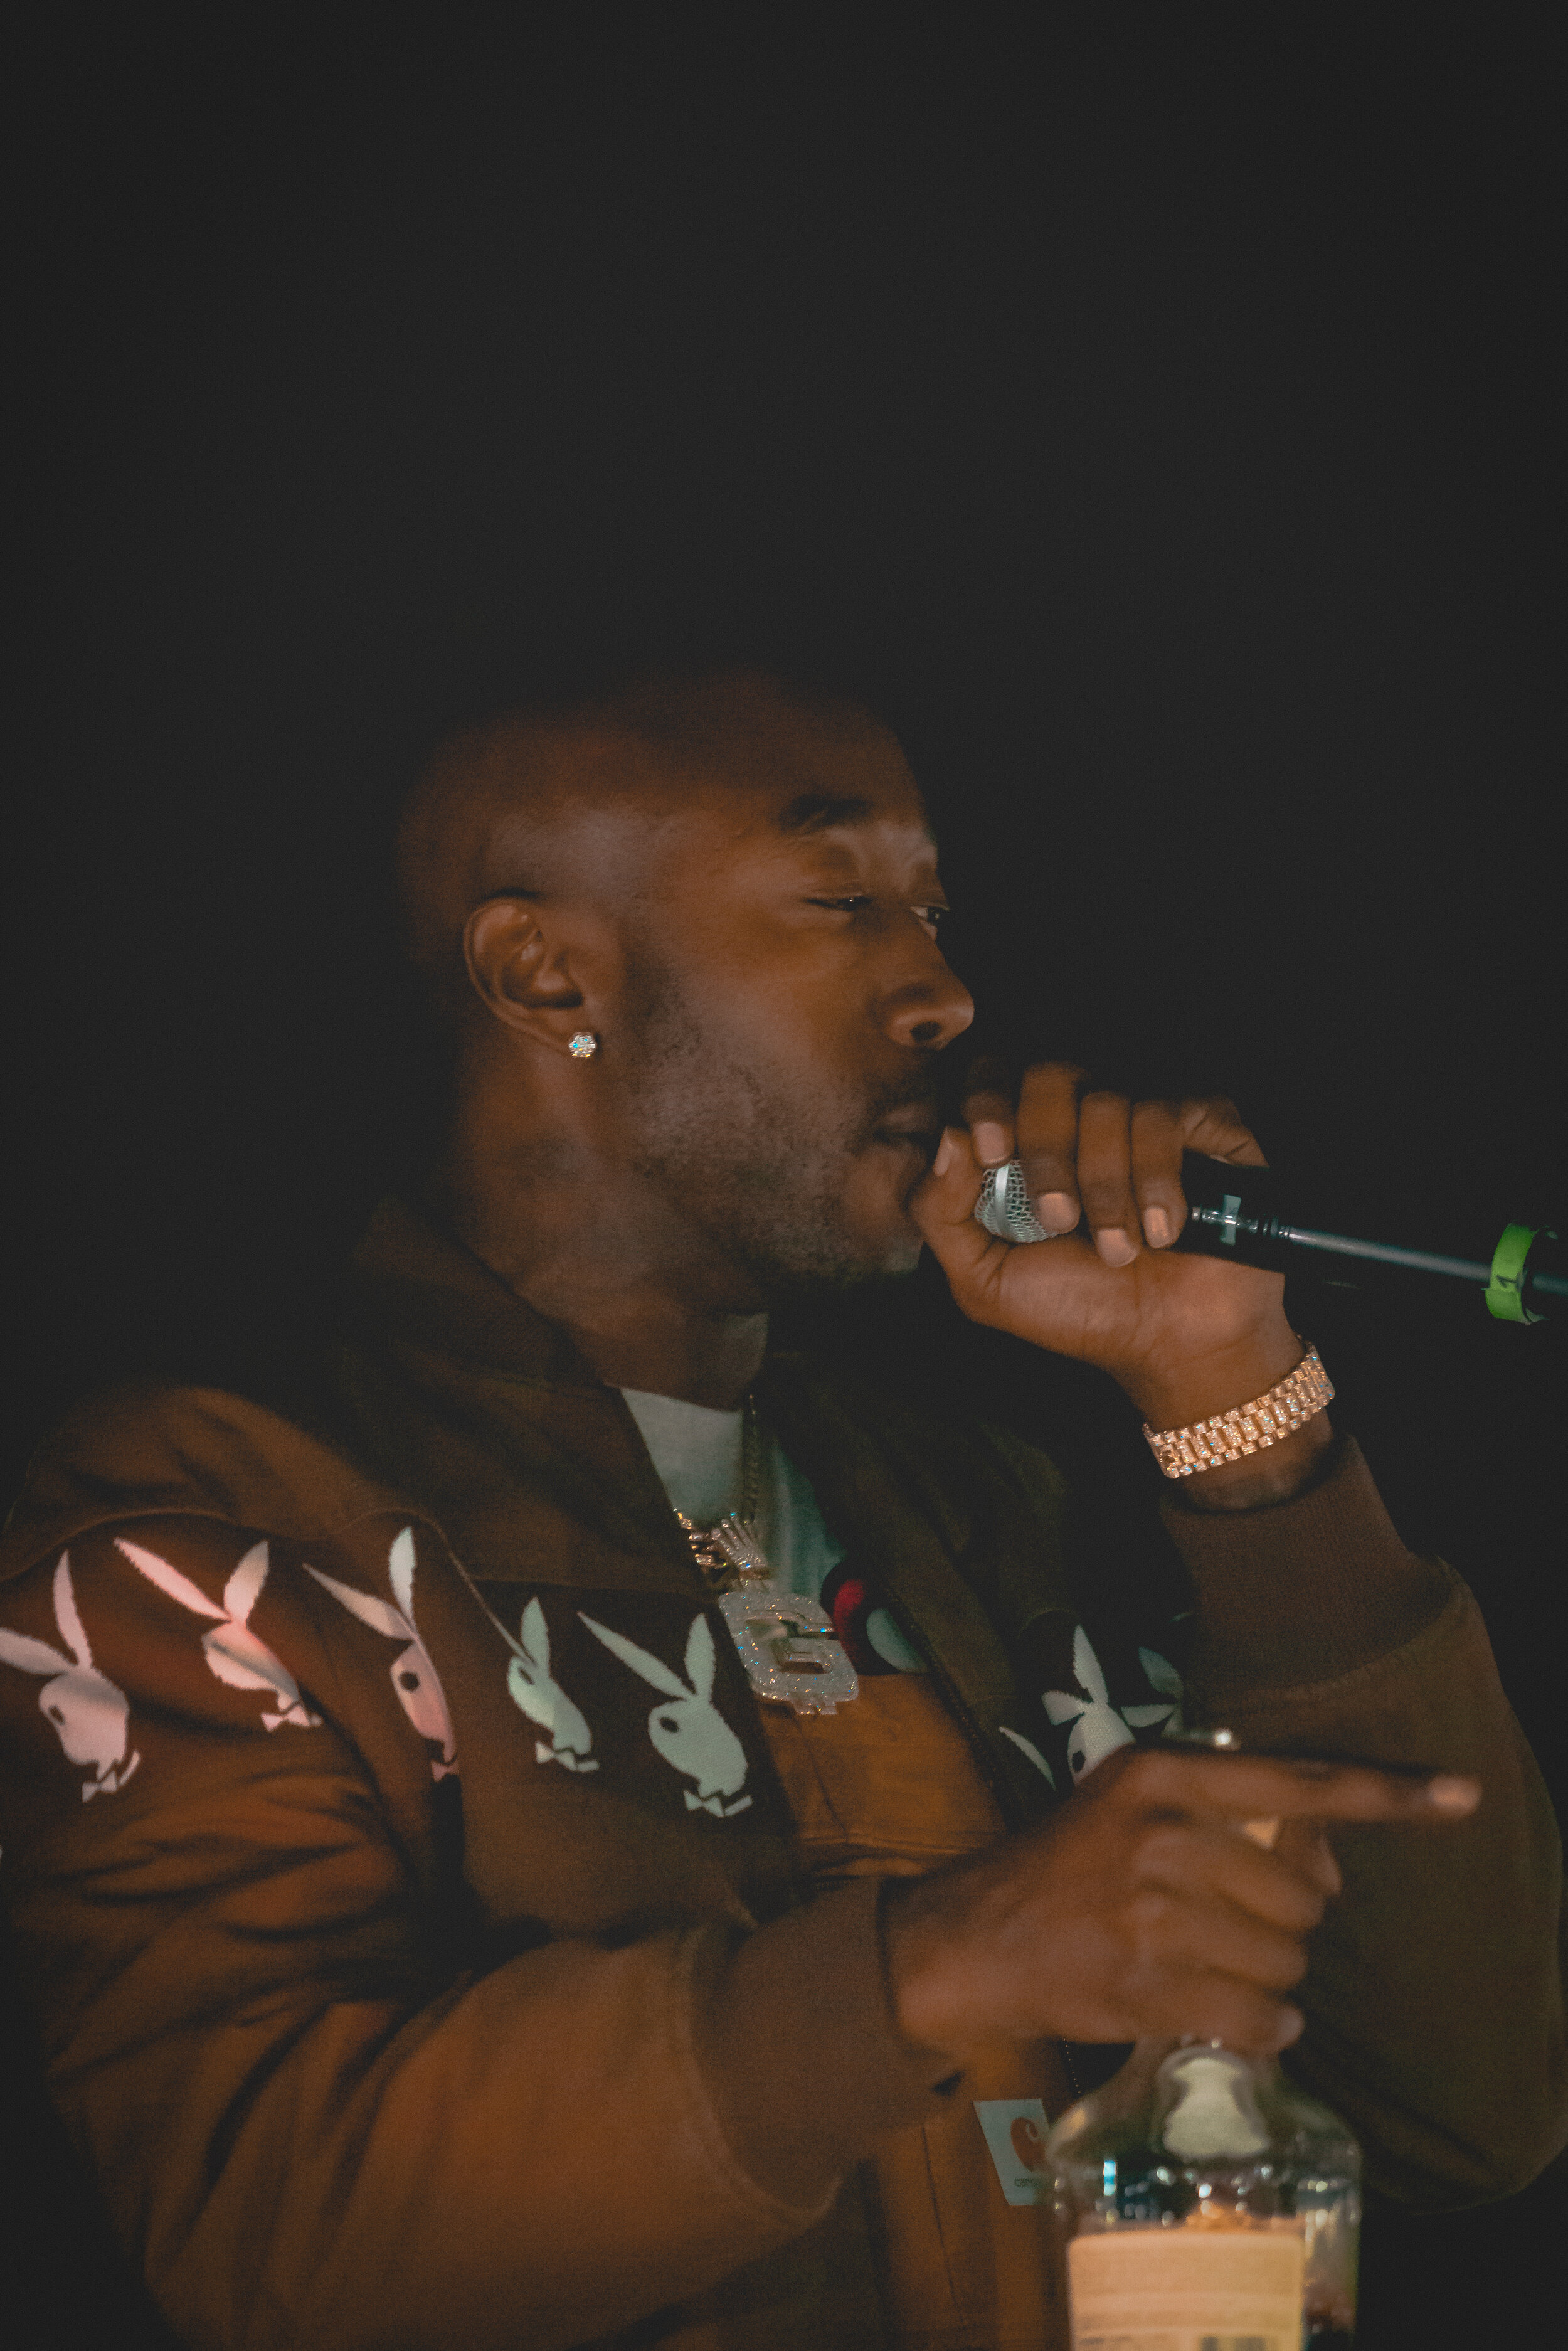 Freddie Gibbs Closes The Album Of The Year Tour At Cervantes In Denver Bolderbeat Discover all of this album's music connections, watch videos, listen to music, discuss and download. freddie gibbs closes the album of the